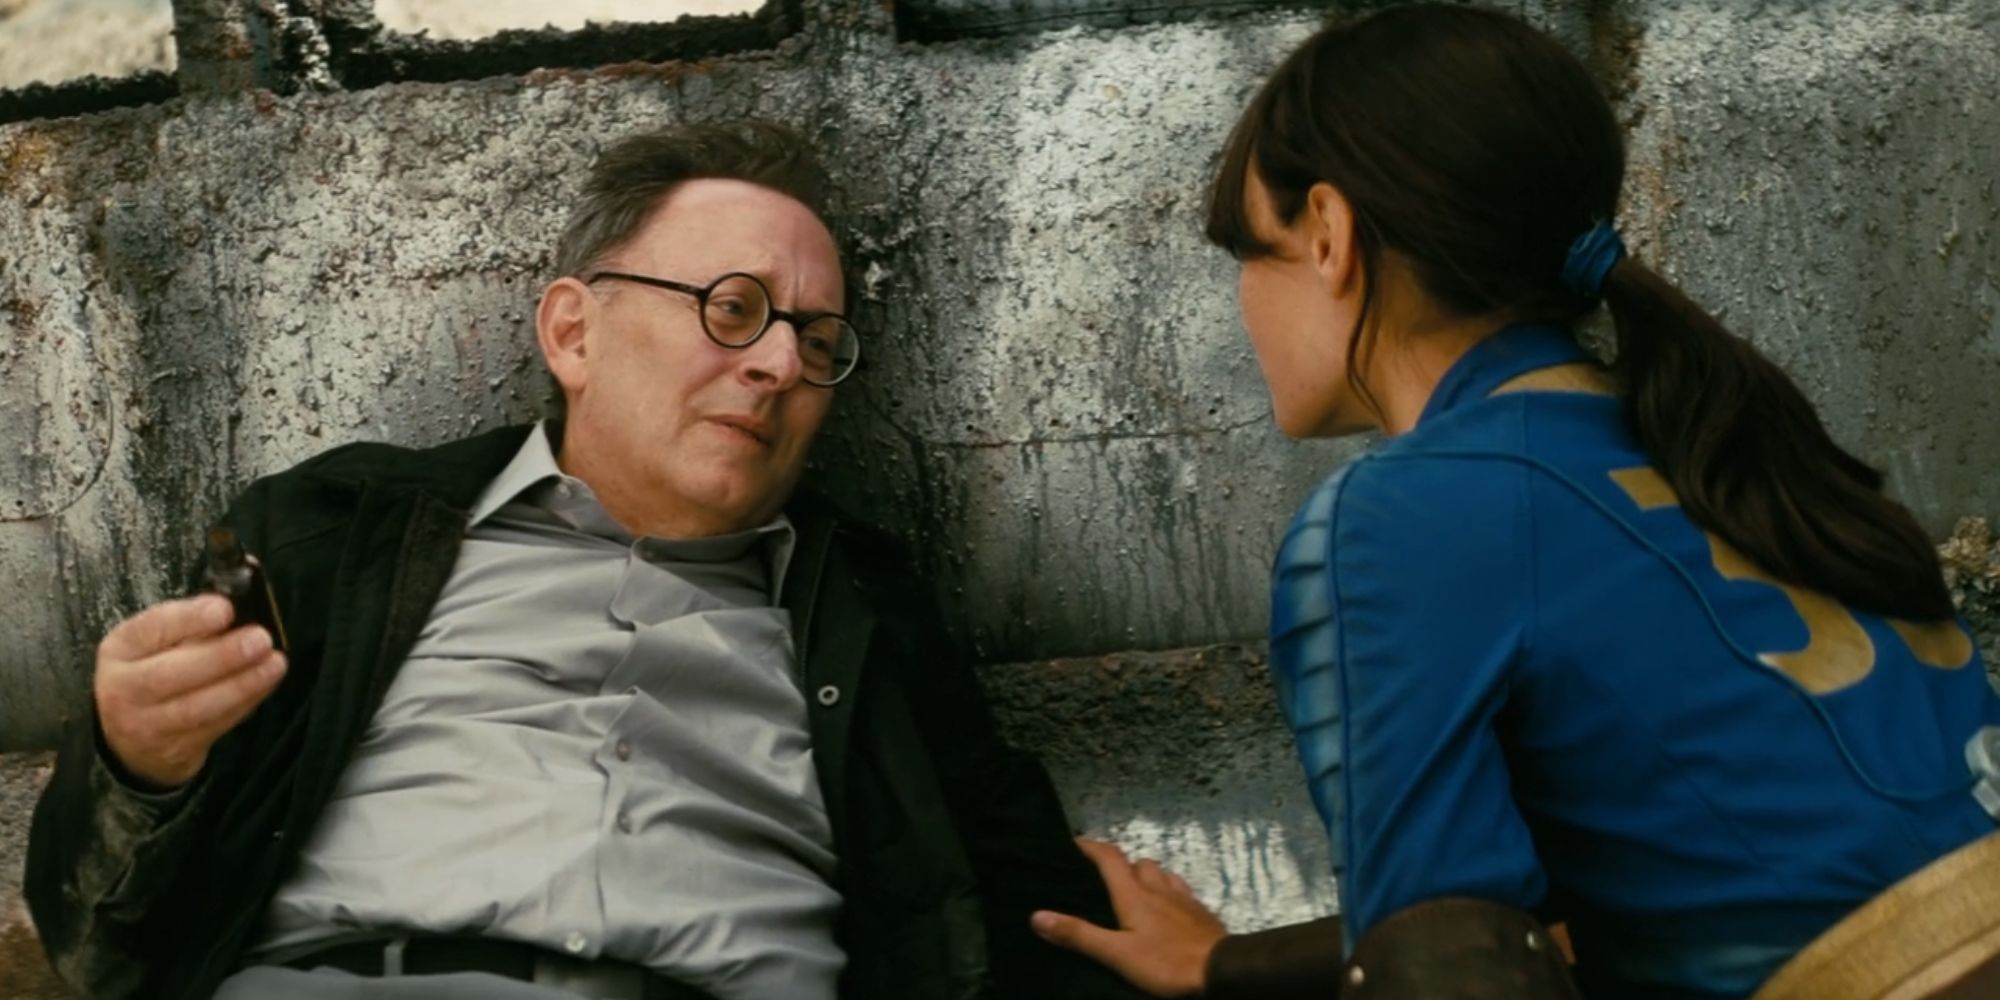 Michael Emerson as Dr. Siggi Wilzig in Fallout lying on the ground with Ella Purnell's Lucy MacLean nearby